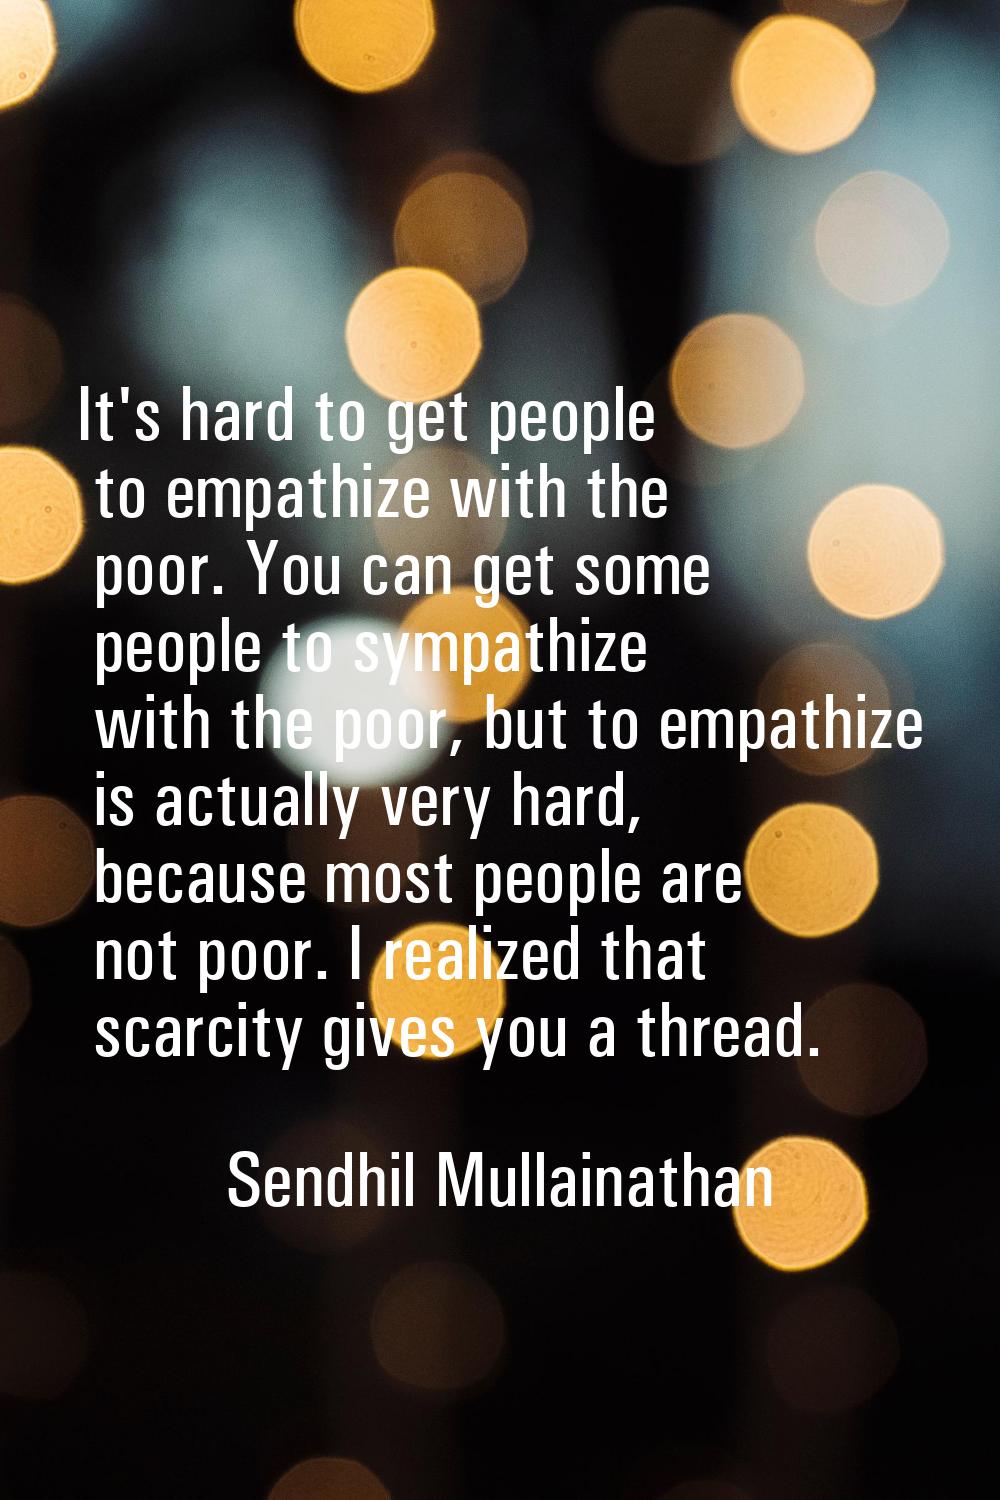 It's hard to get people to empathize with the poor. You can get some people to sympathize with the 